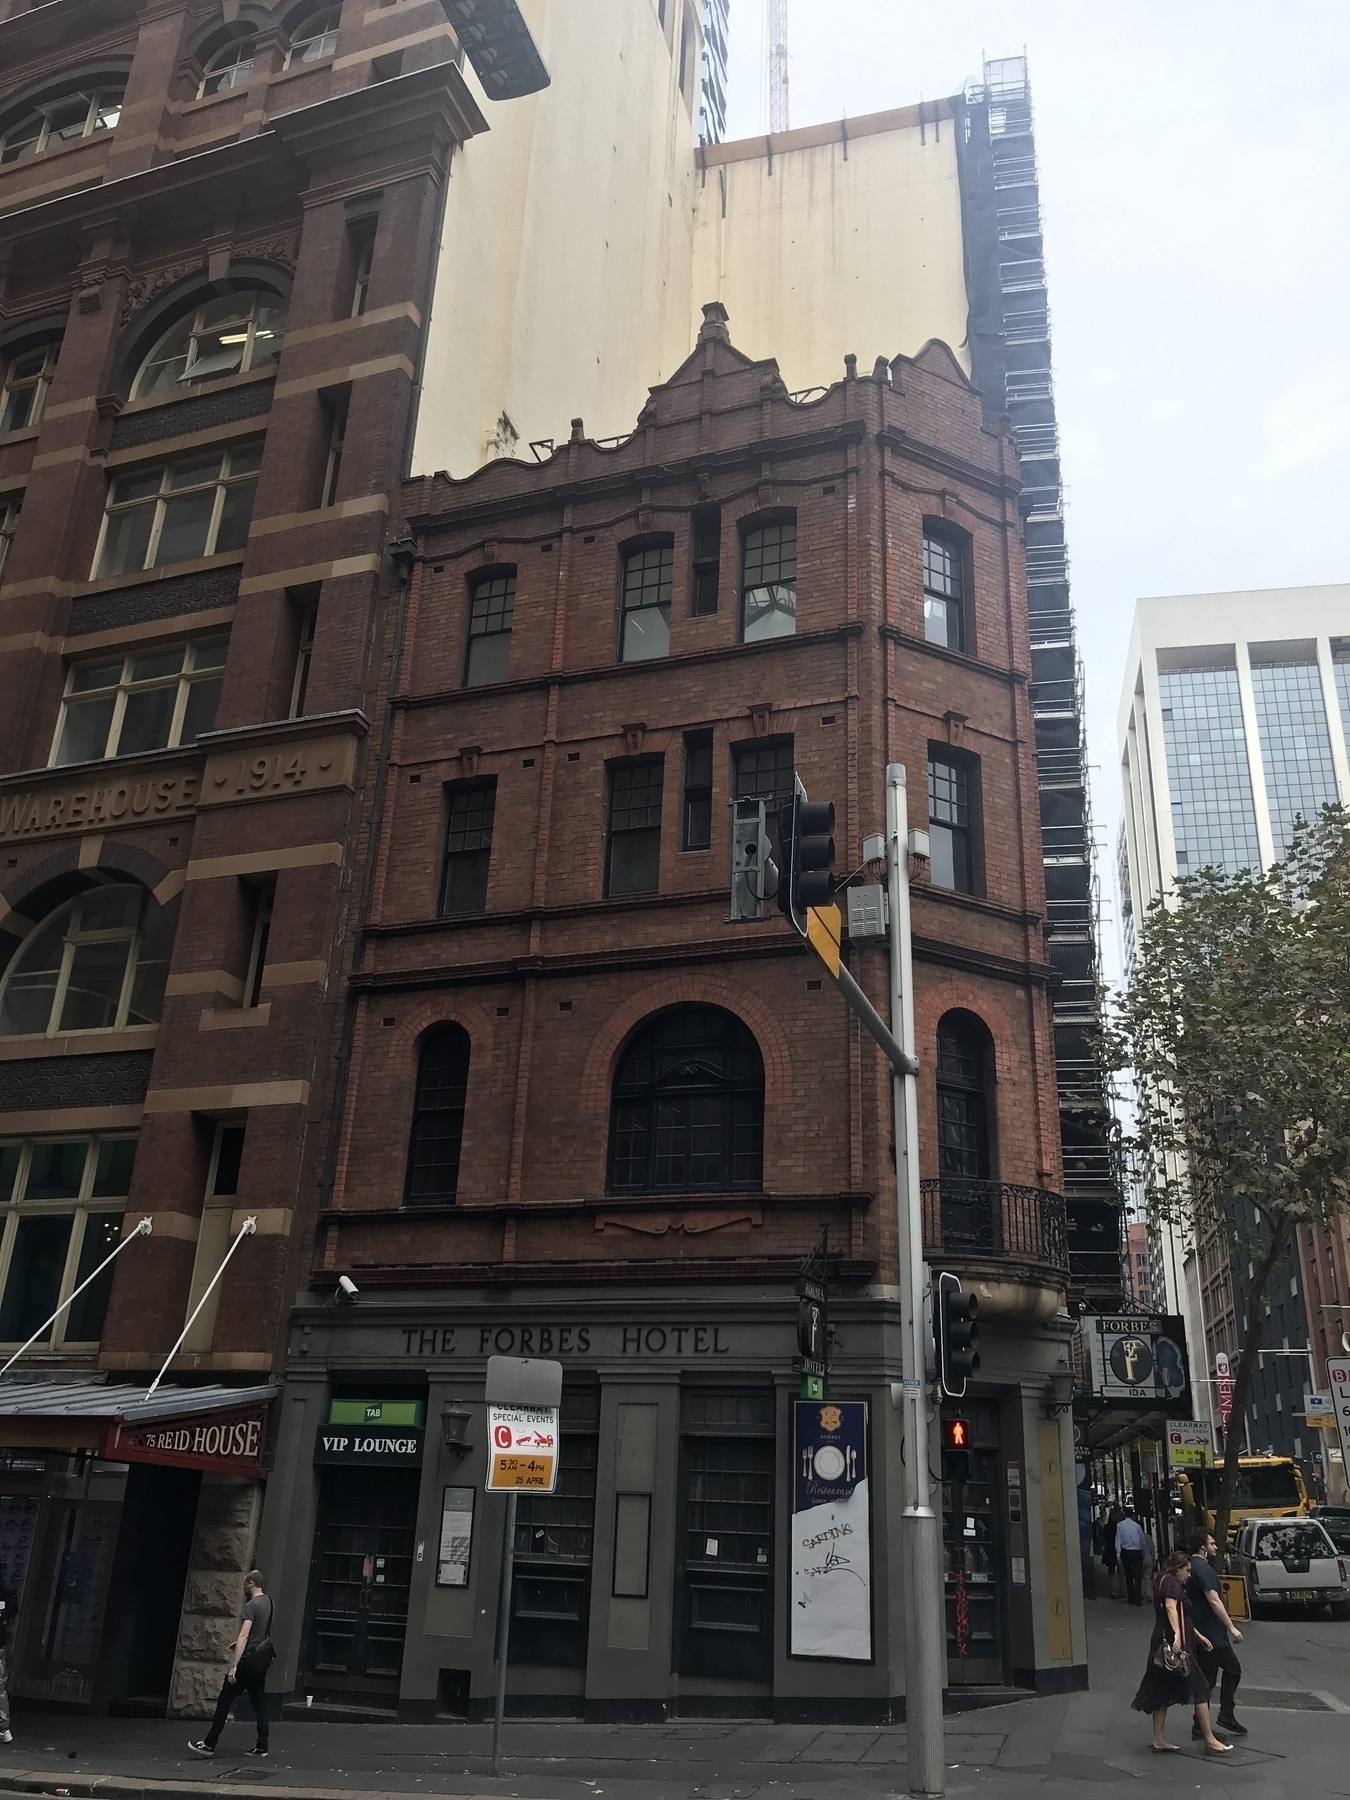 Looking across King Street Sydney at the side of the Forbes Hotel, a four-storey brick structure with ornamental brickwork on the top three floors. An undulating half wall at the top, incorporating two tall triangular peaks, is very clear against two cream walls of a taller building behind. Every door and window is black timber and glass. The ground floor is half grey wall and half black doorways, with the hotel name at the top.The hotel presses against a taller building next door which is also brick, and shows the lettering 'Warehouse 1914'.